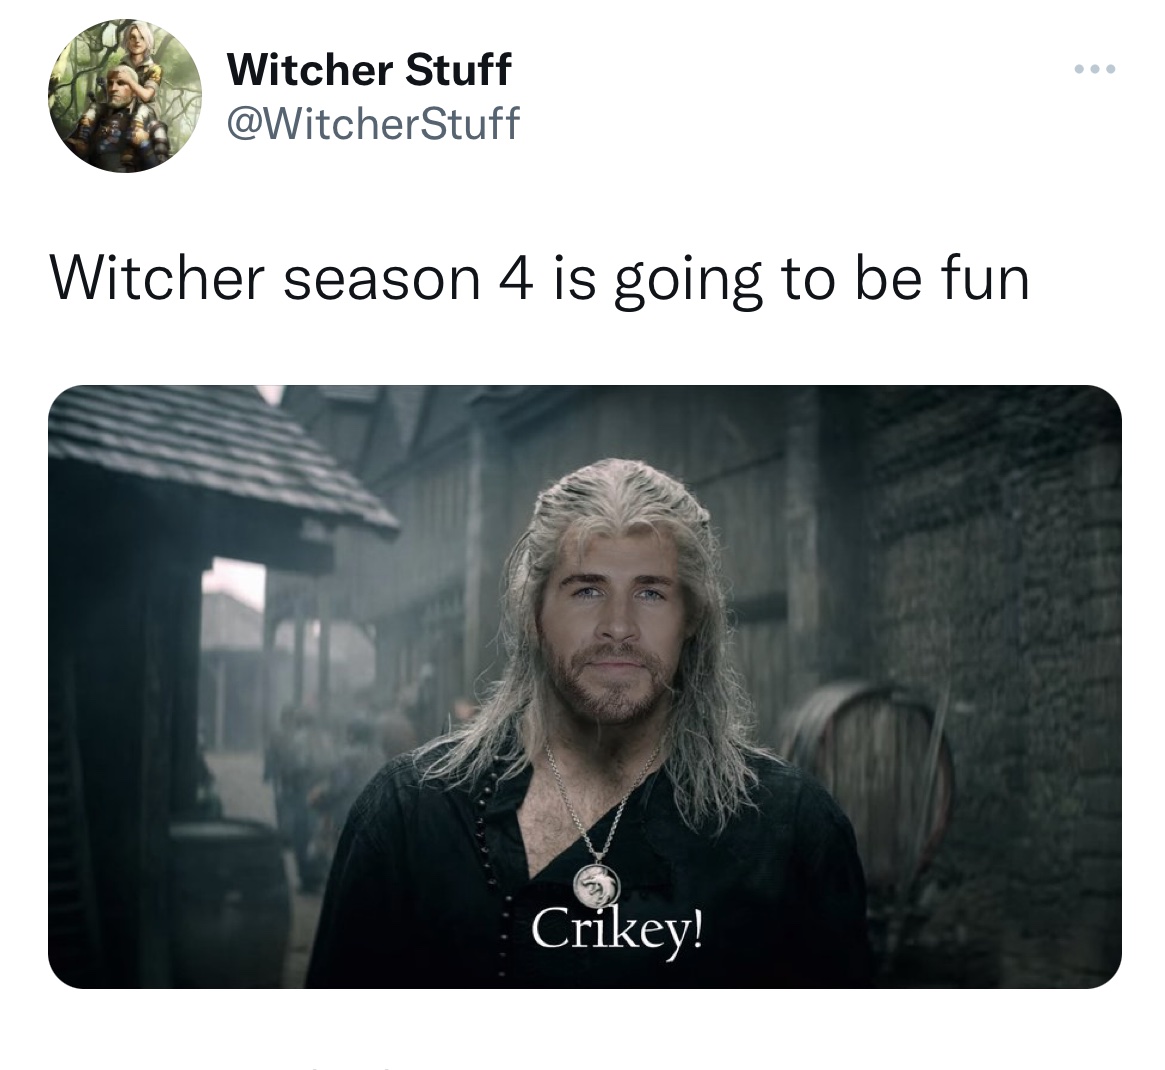 Tweets roasting celebs - i m a simple man with simple needs meme - Witcher Stuff Witcher season 4 is going to be fun Crikey!